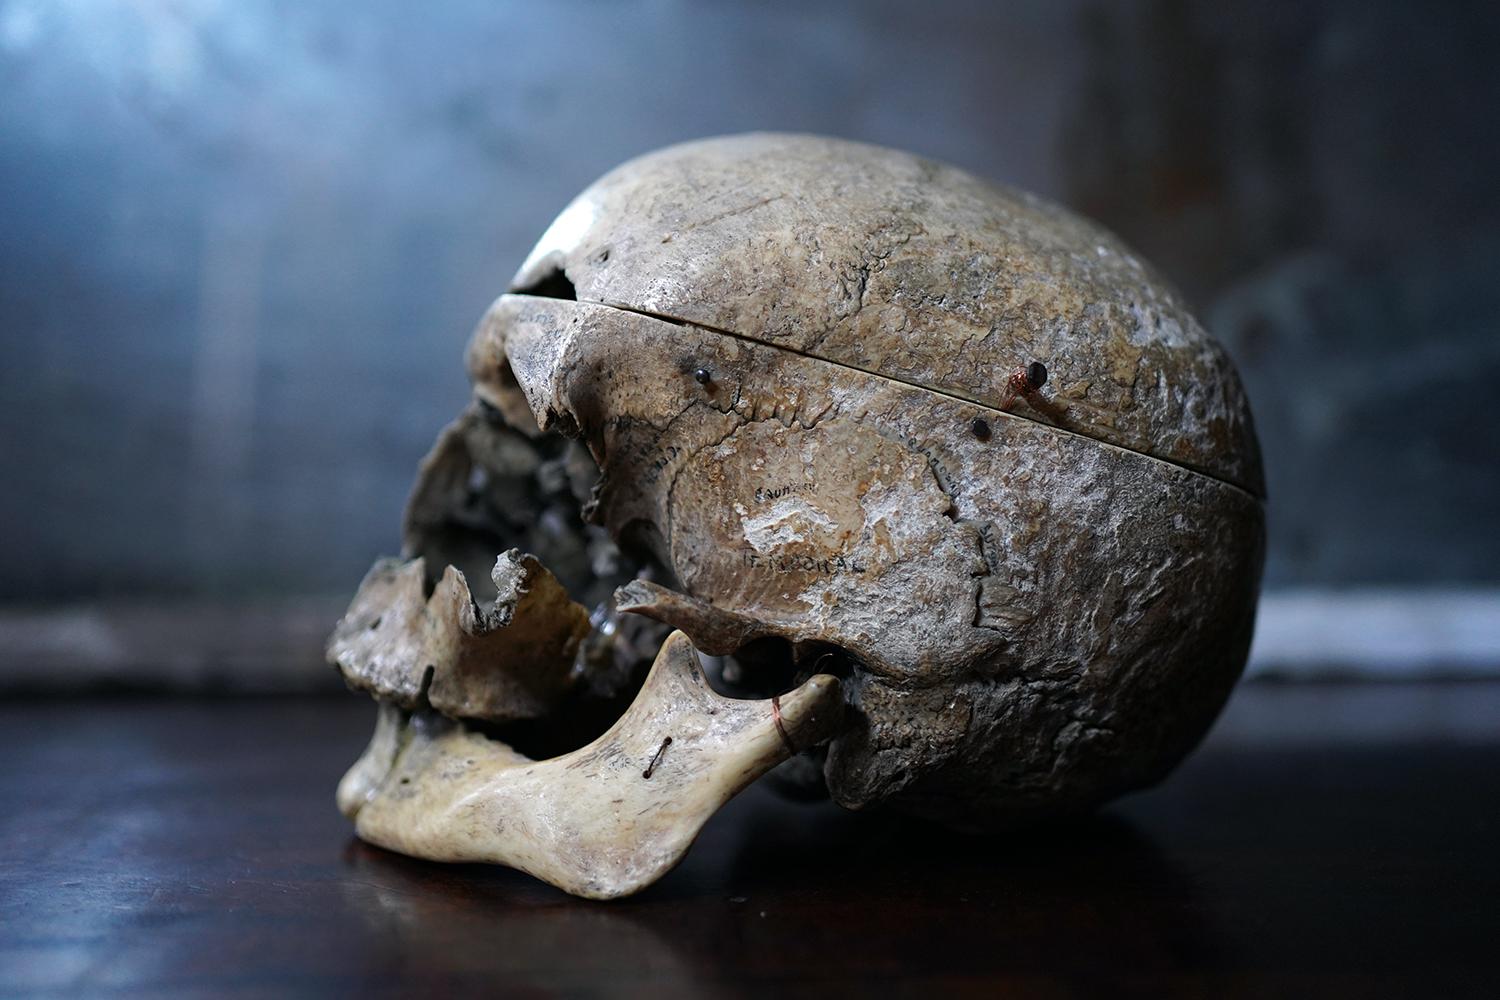 The largely in-tact human skull, dating to the late nineteenth to early twentieth centuries, having been used for medical study or phrenological demonstration and inscribed in both in English and Latin in the early part of the twentieth century in